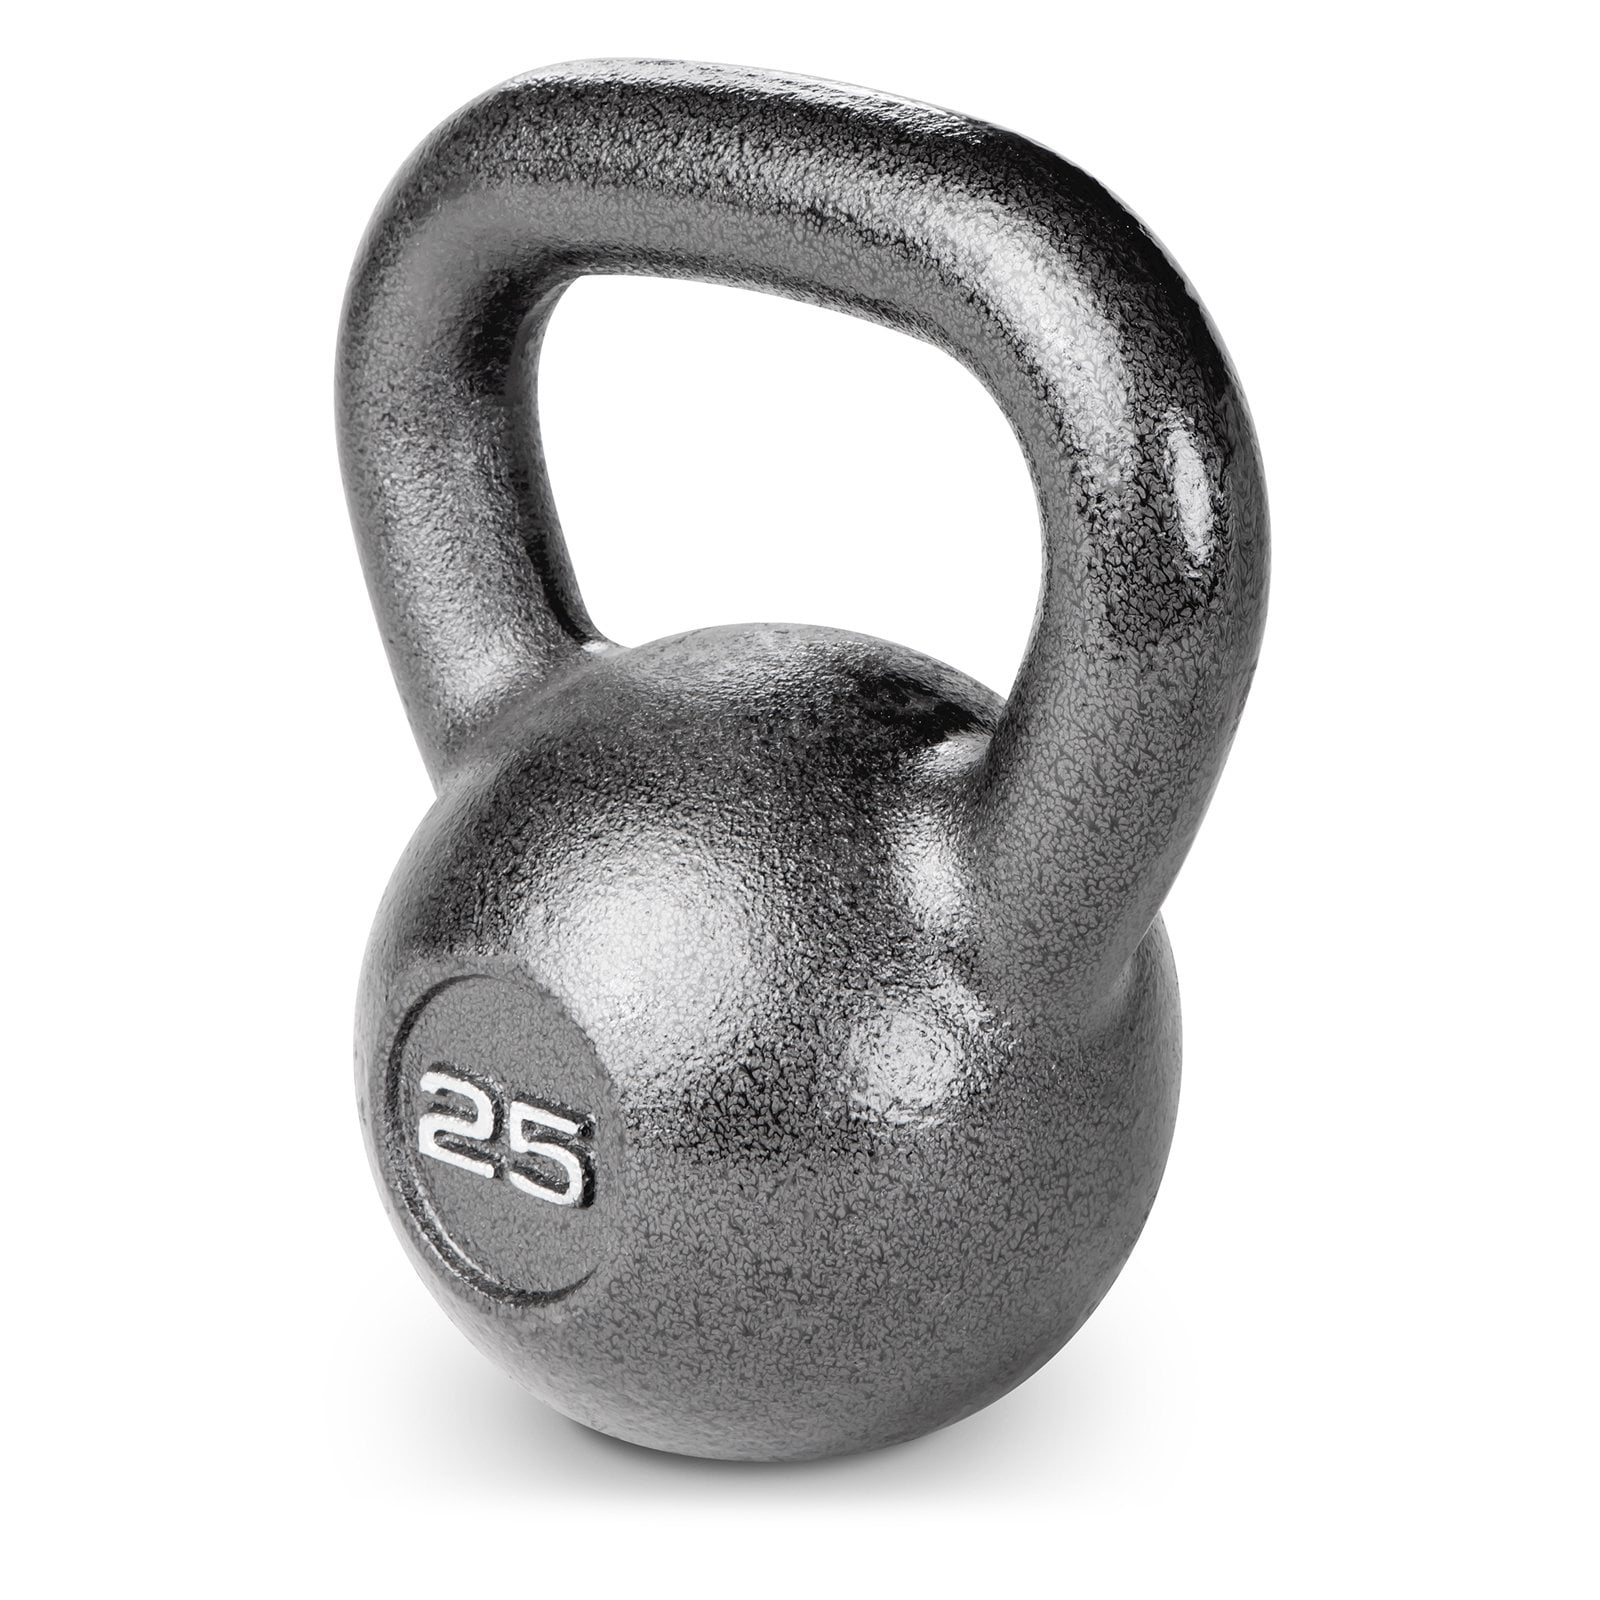 25lb Kettlebell (12kg) American-Made Cast Iron - Fast Flat Rate